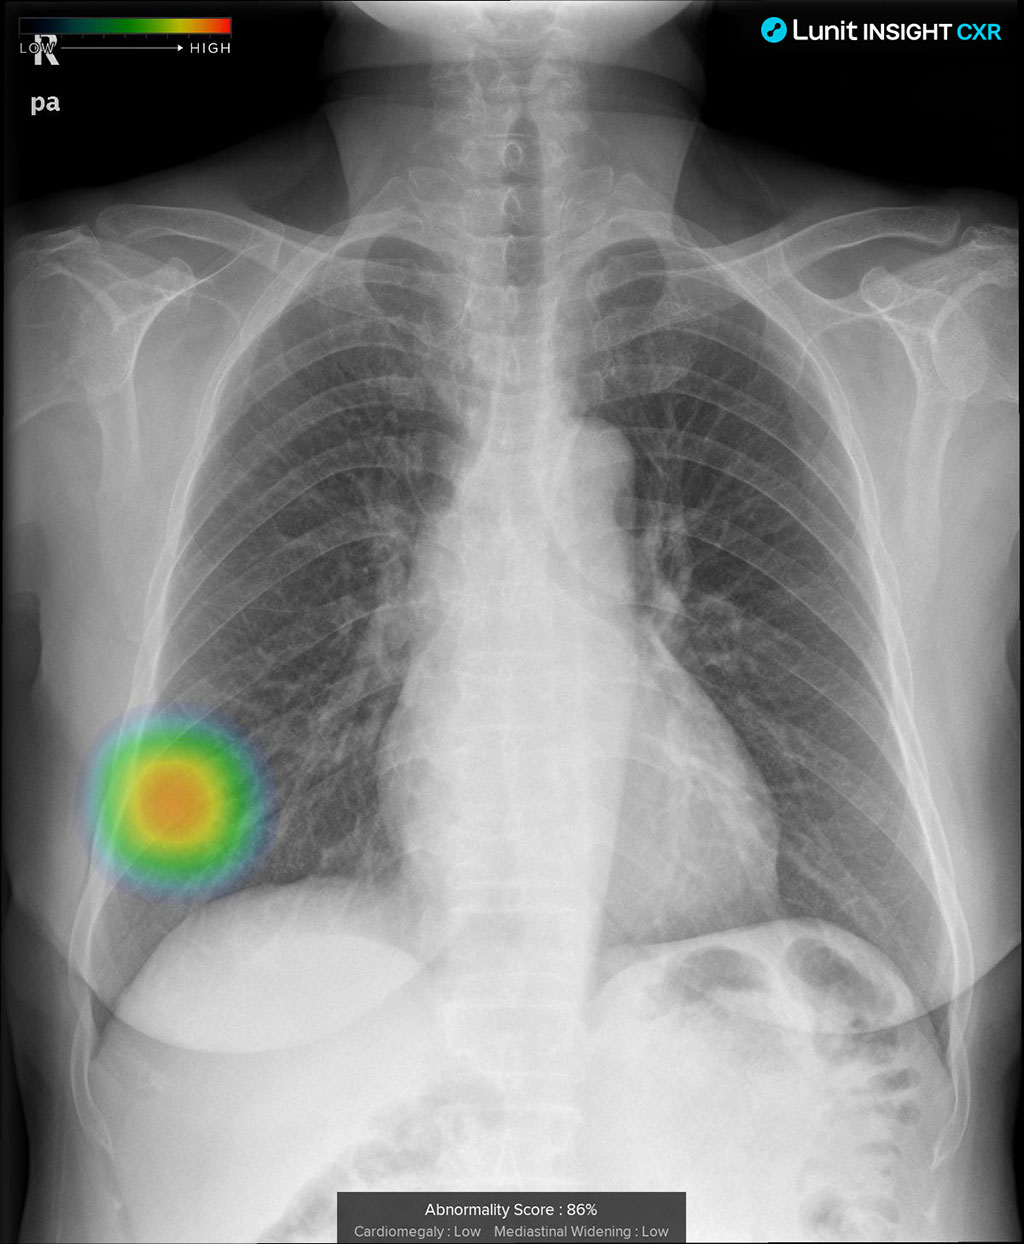 Image: The AI system identifies improperly positioned endotracheal tube on chest radiographs (Photo courtesy of Lunit)